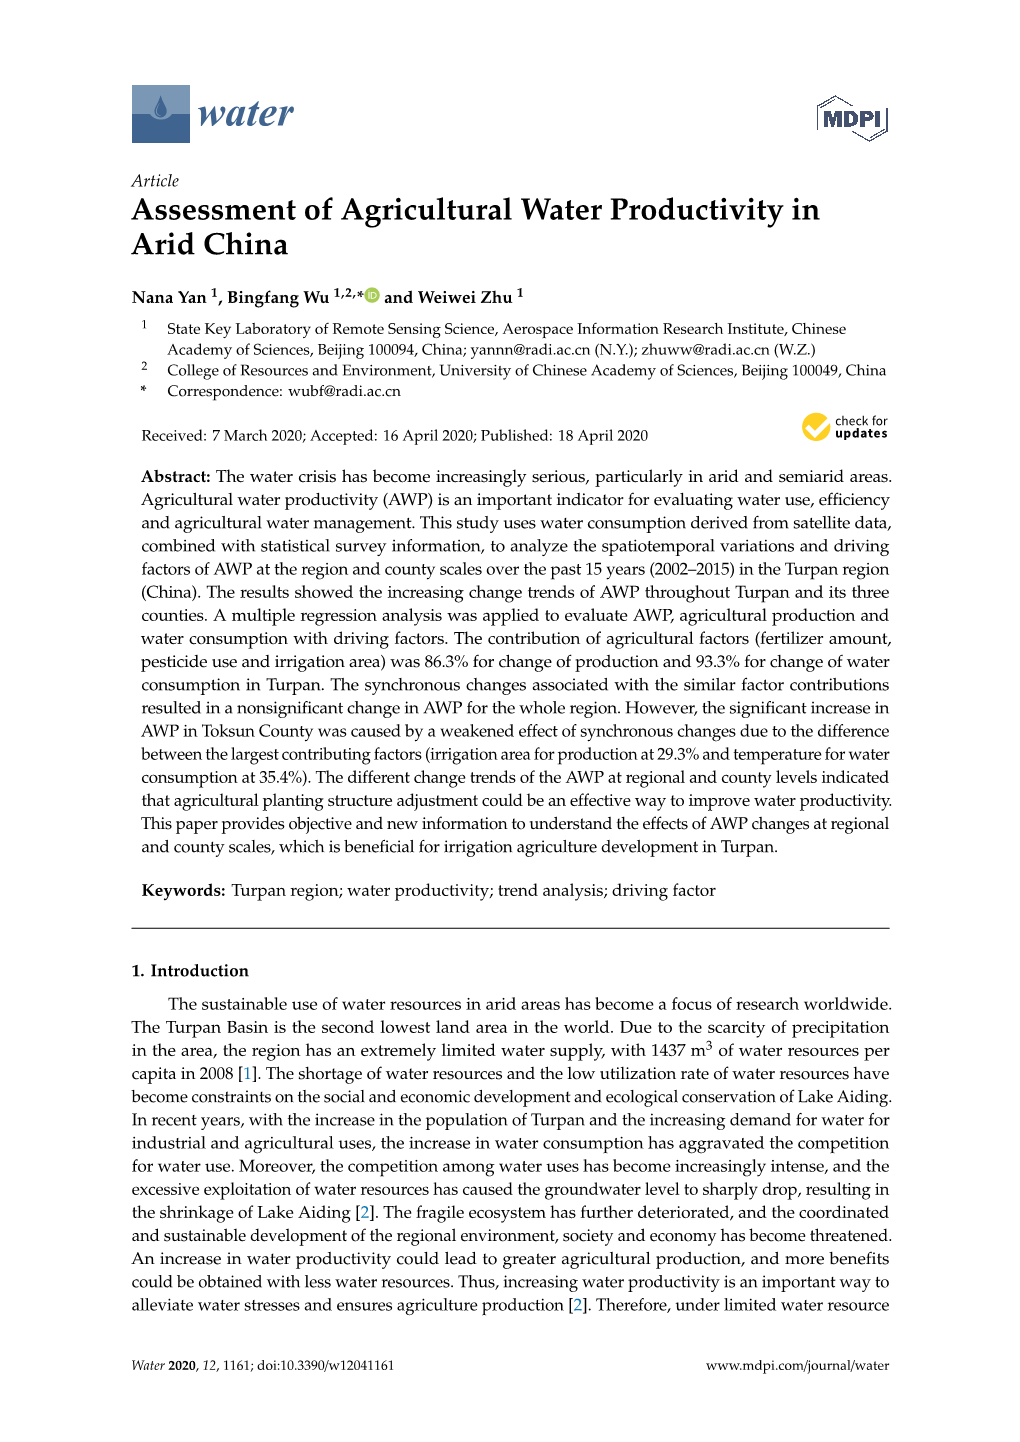 Assessment of Agricultural Water Productivity in Arid China